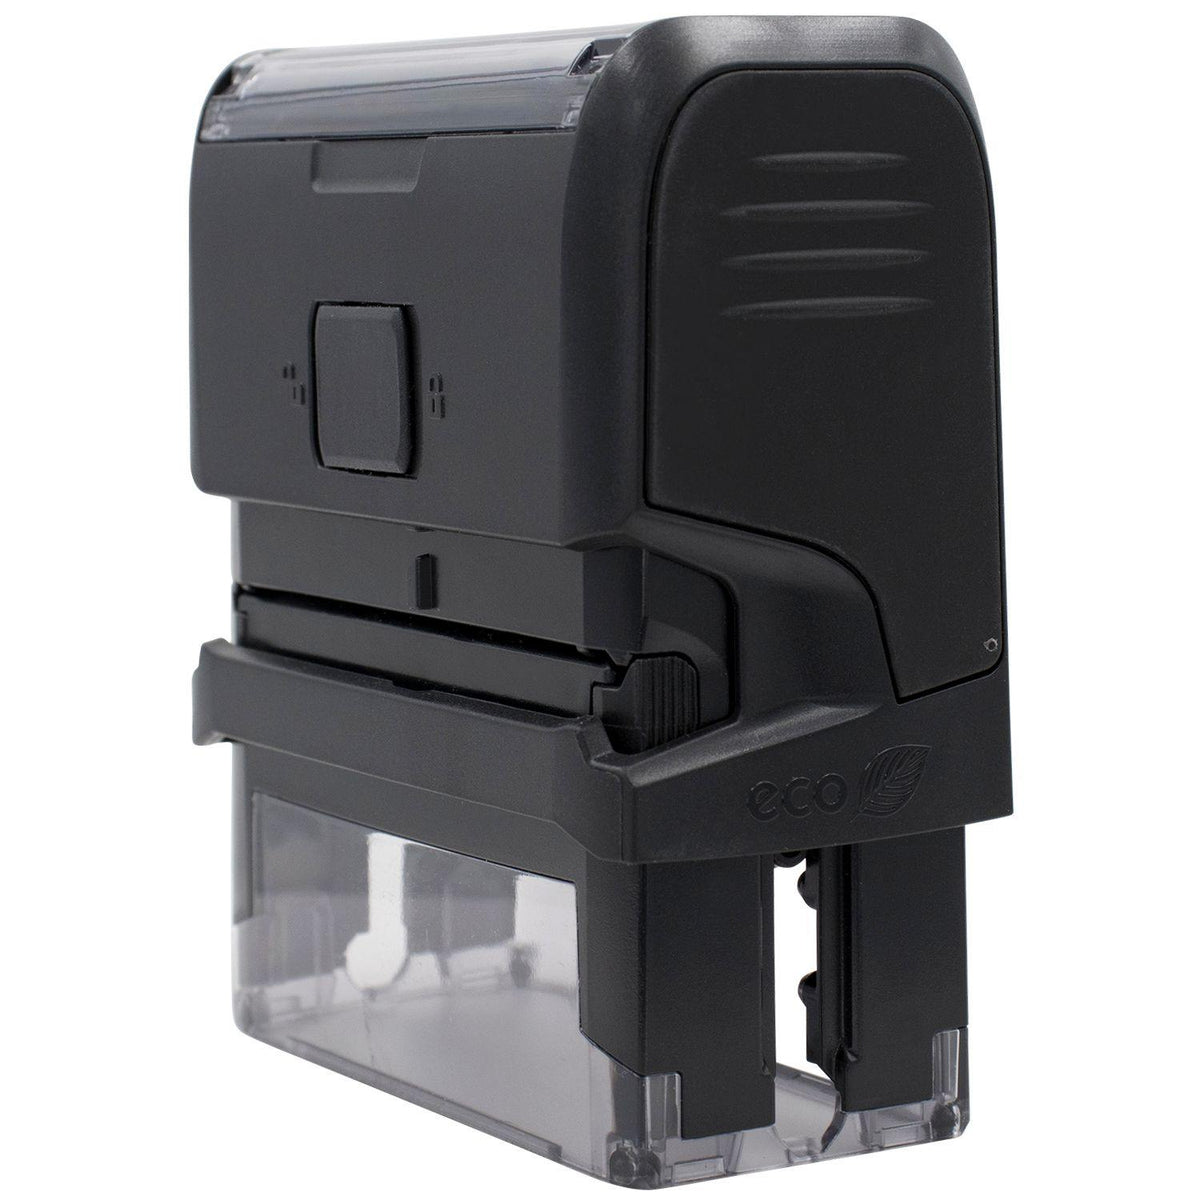 Self-Inking I like it Stamp - Engineer Seal Stamps - Brand_Trodat, Impression Size_Small, Stamp Type_Self-Inking Stamp, Type of Use_General, Type of Use_Teacher